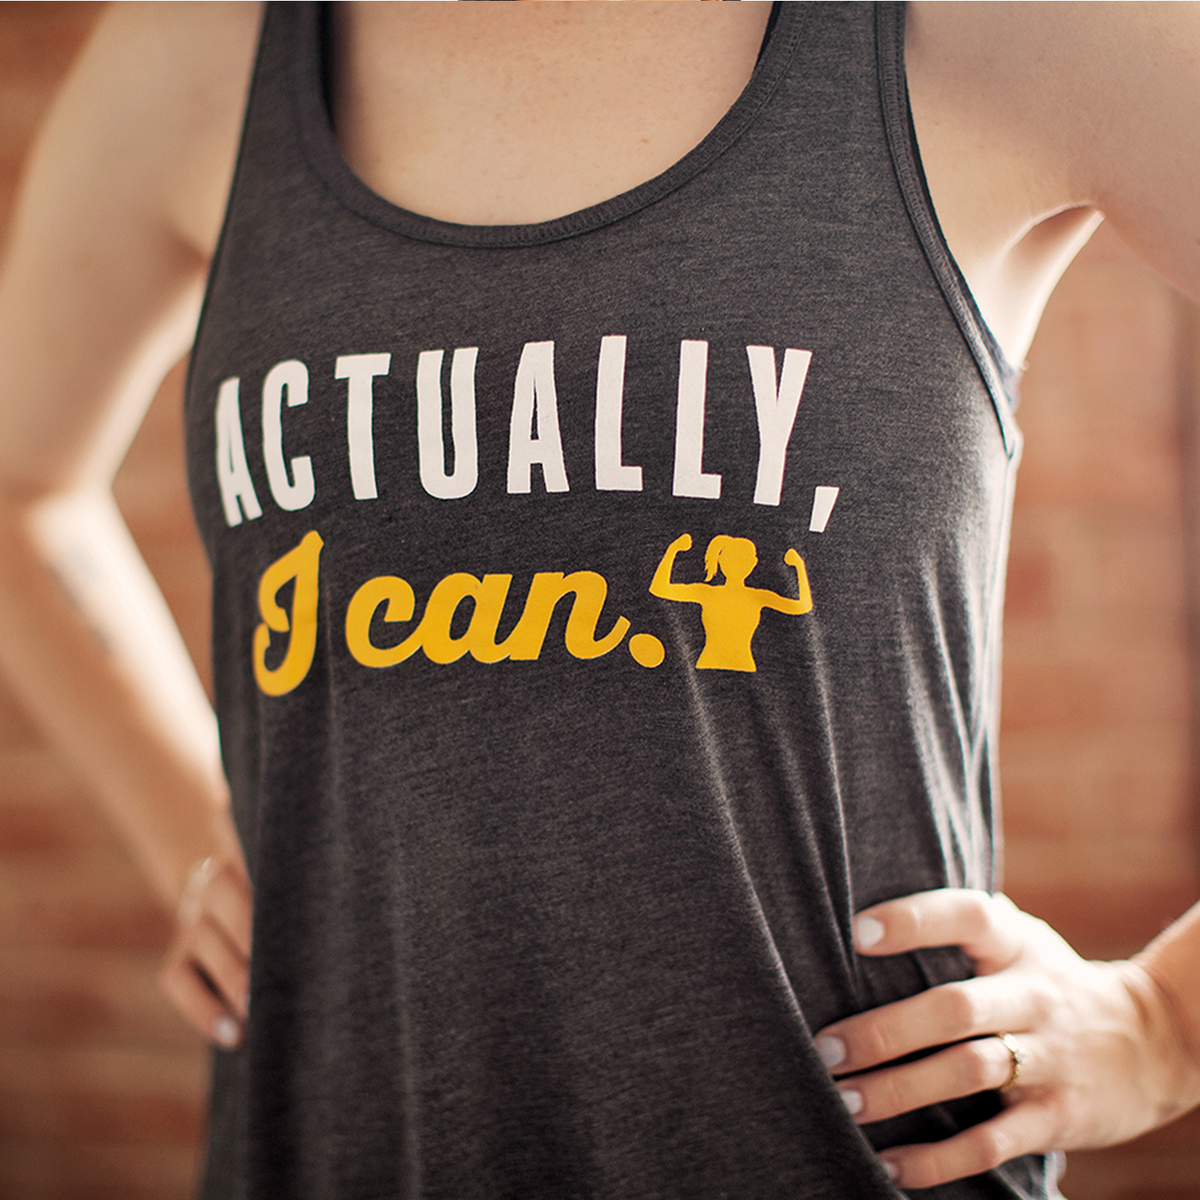 Women's Gym Tanks with Empowering Sayings